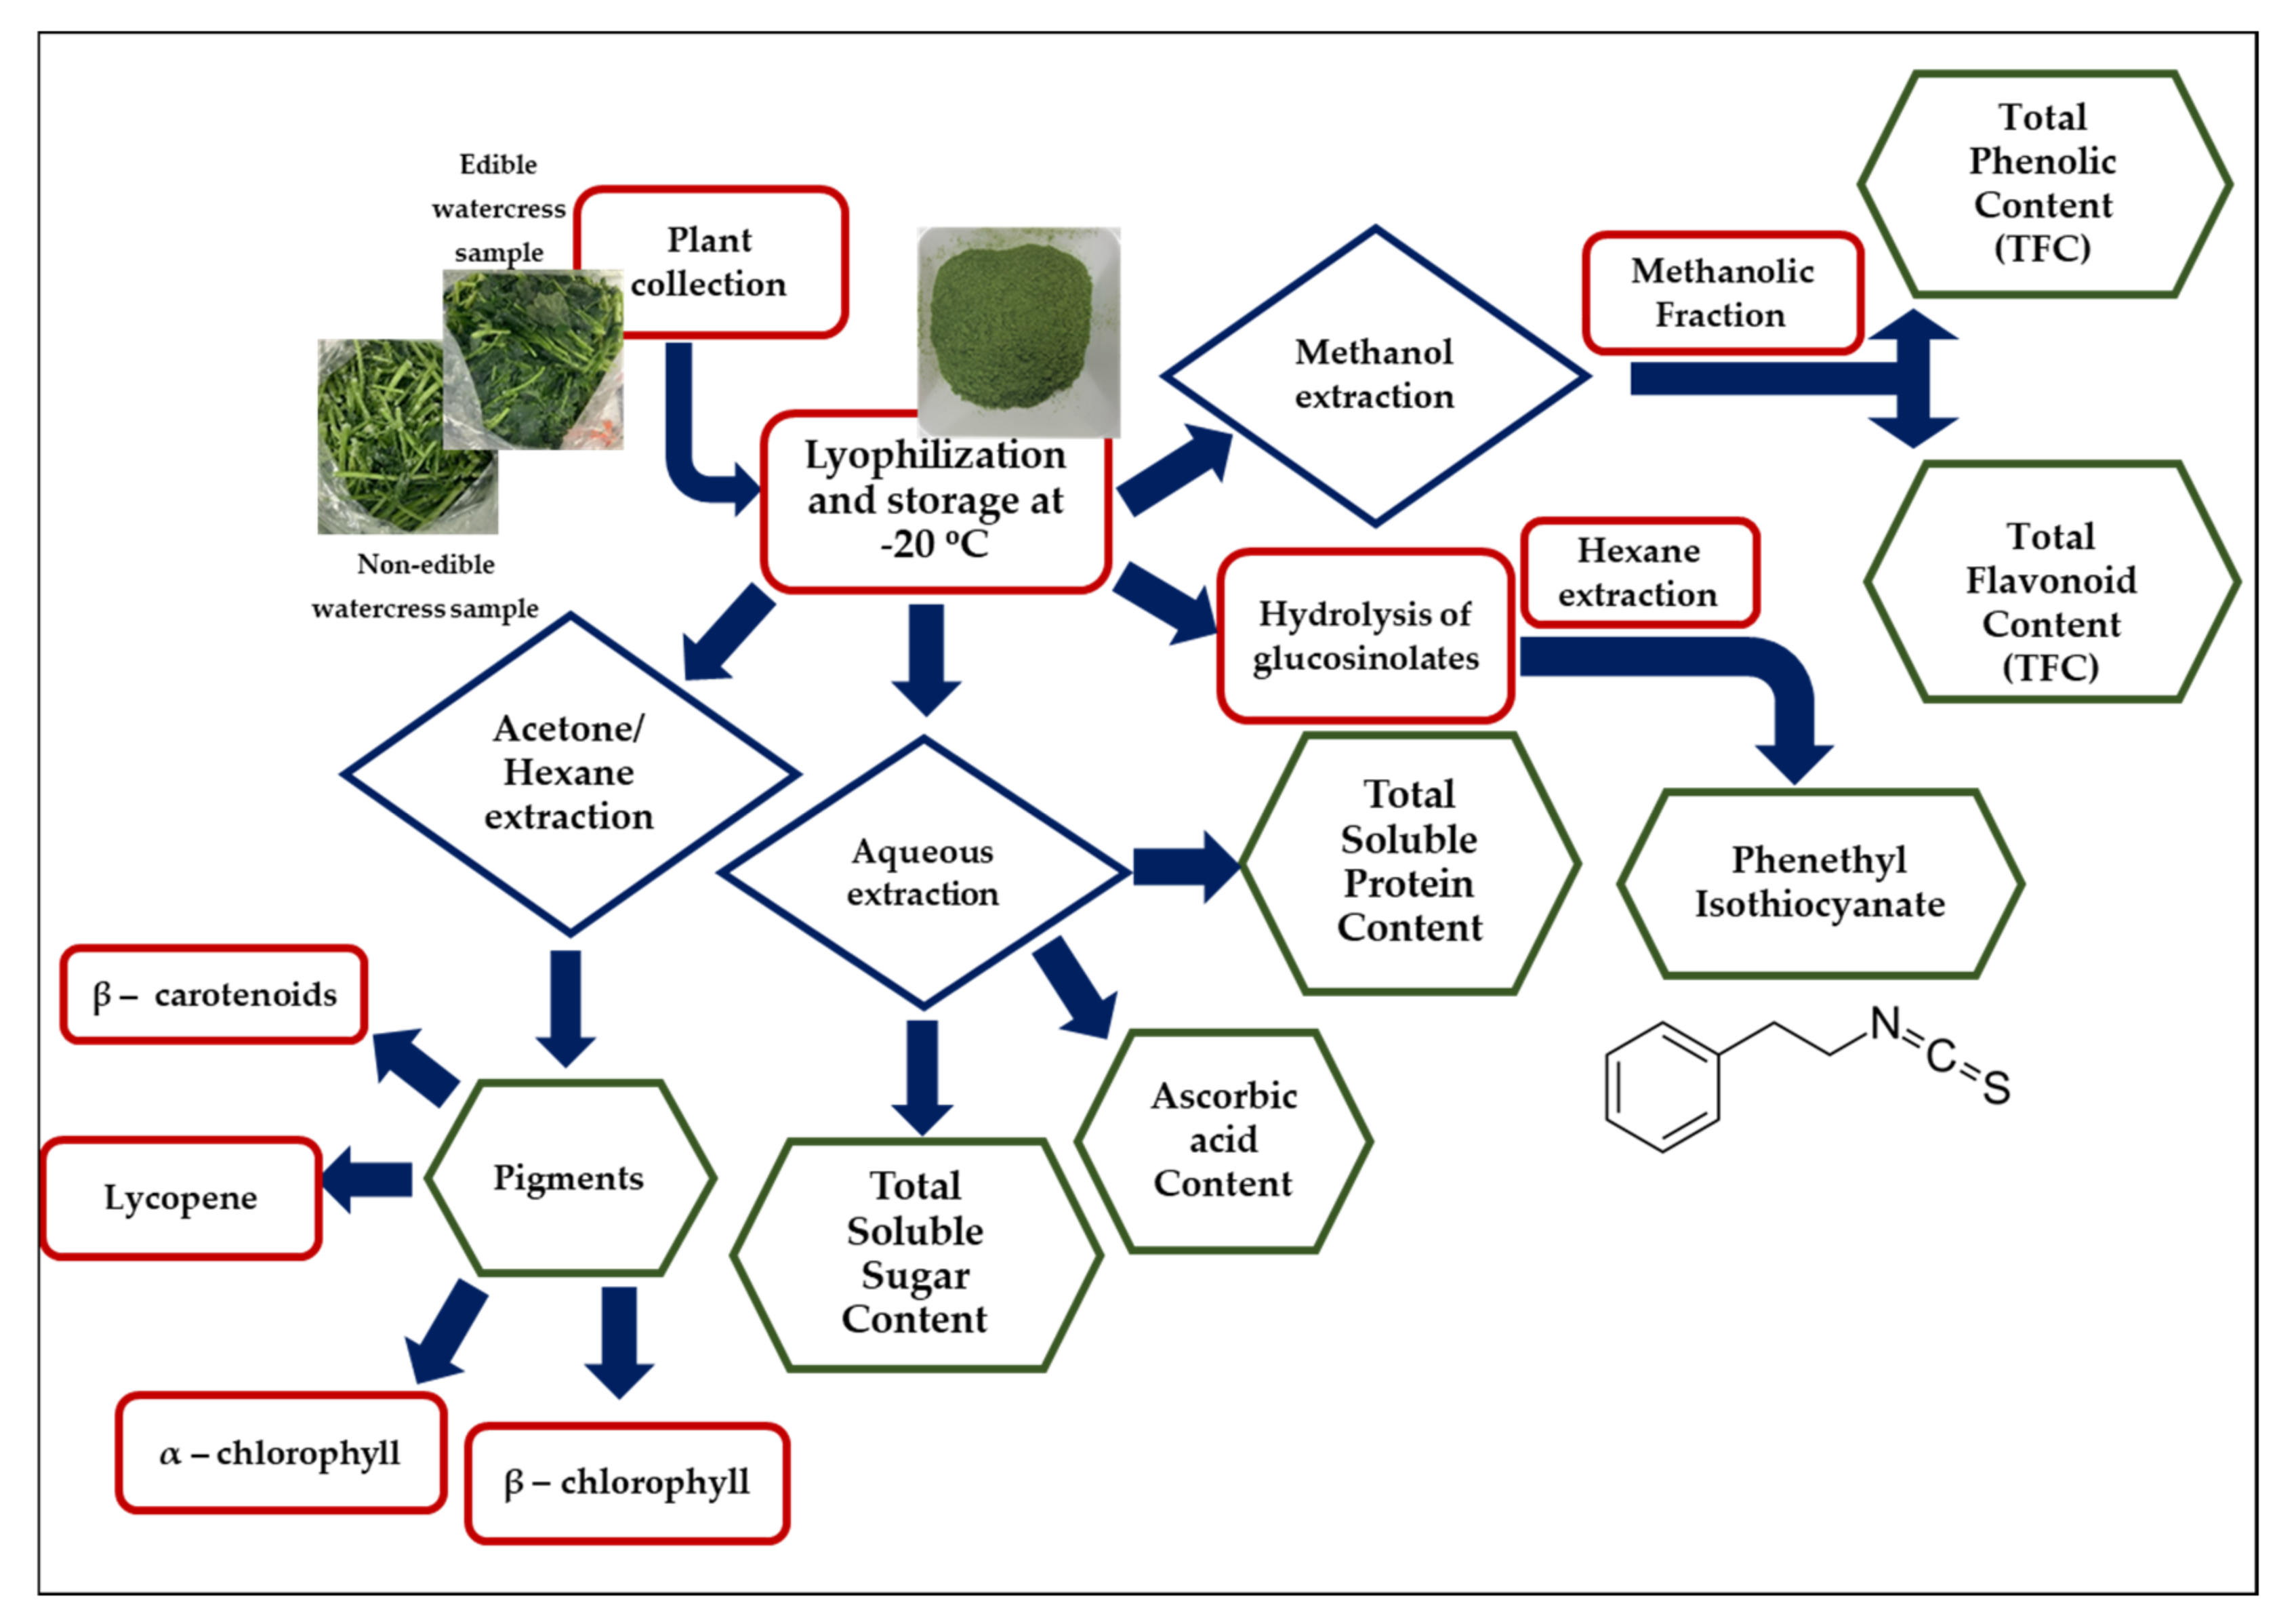 Pharmaceuticals | Free Full-Text | Evaluation of Bioactive Properties of  Lipophilic Fractions of Edible and Non-Edible Parts of Nasturtium  officinale (Watercress) in a Model of Human Malignant Melanoma Cells